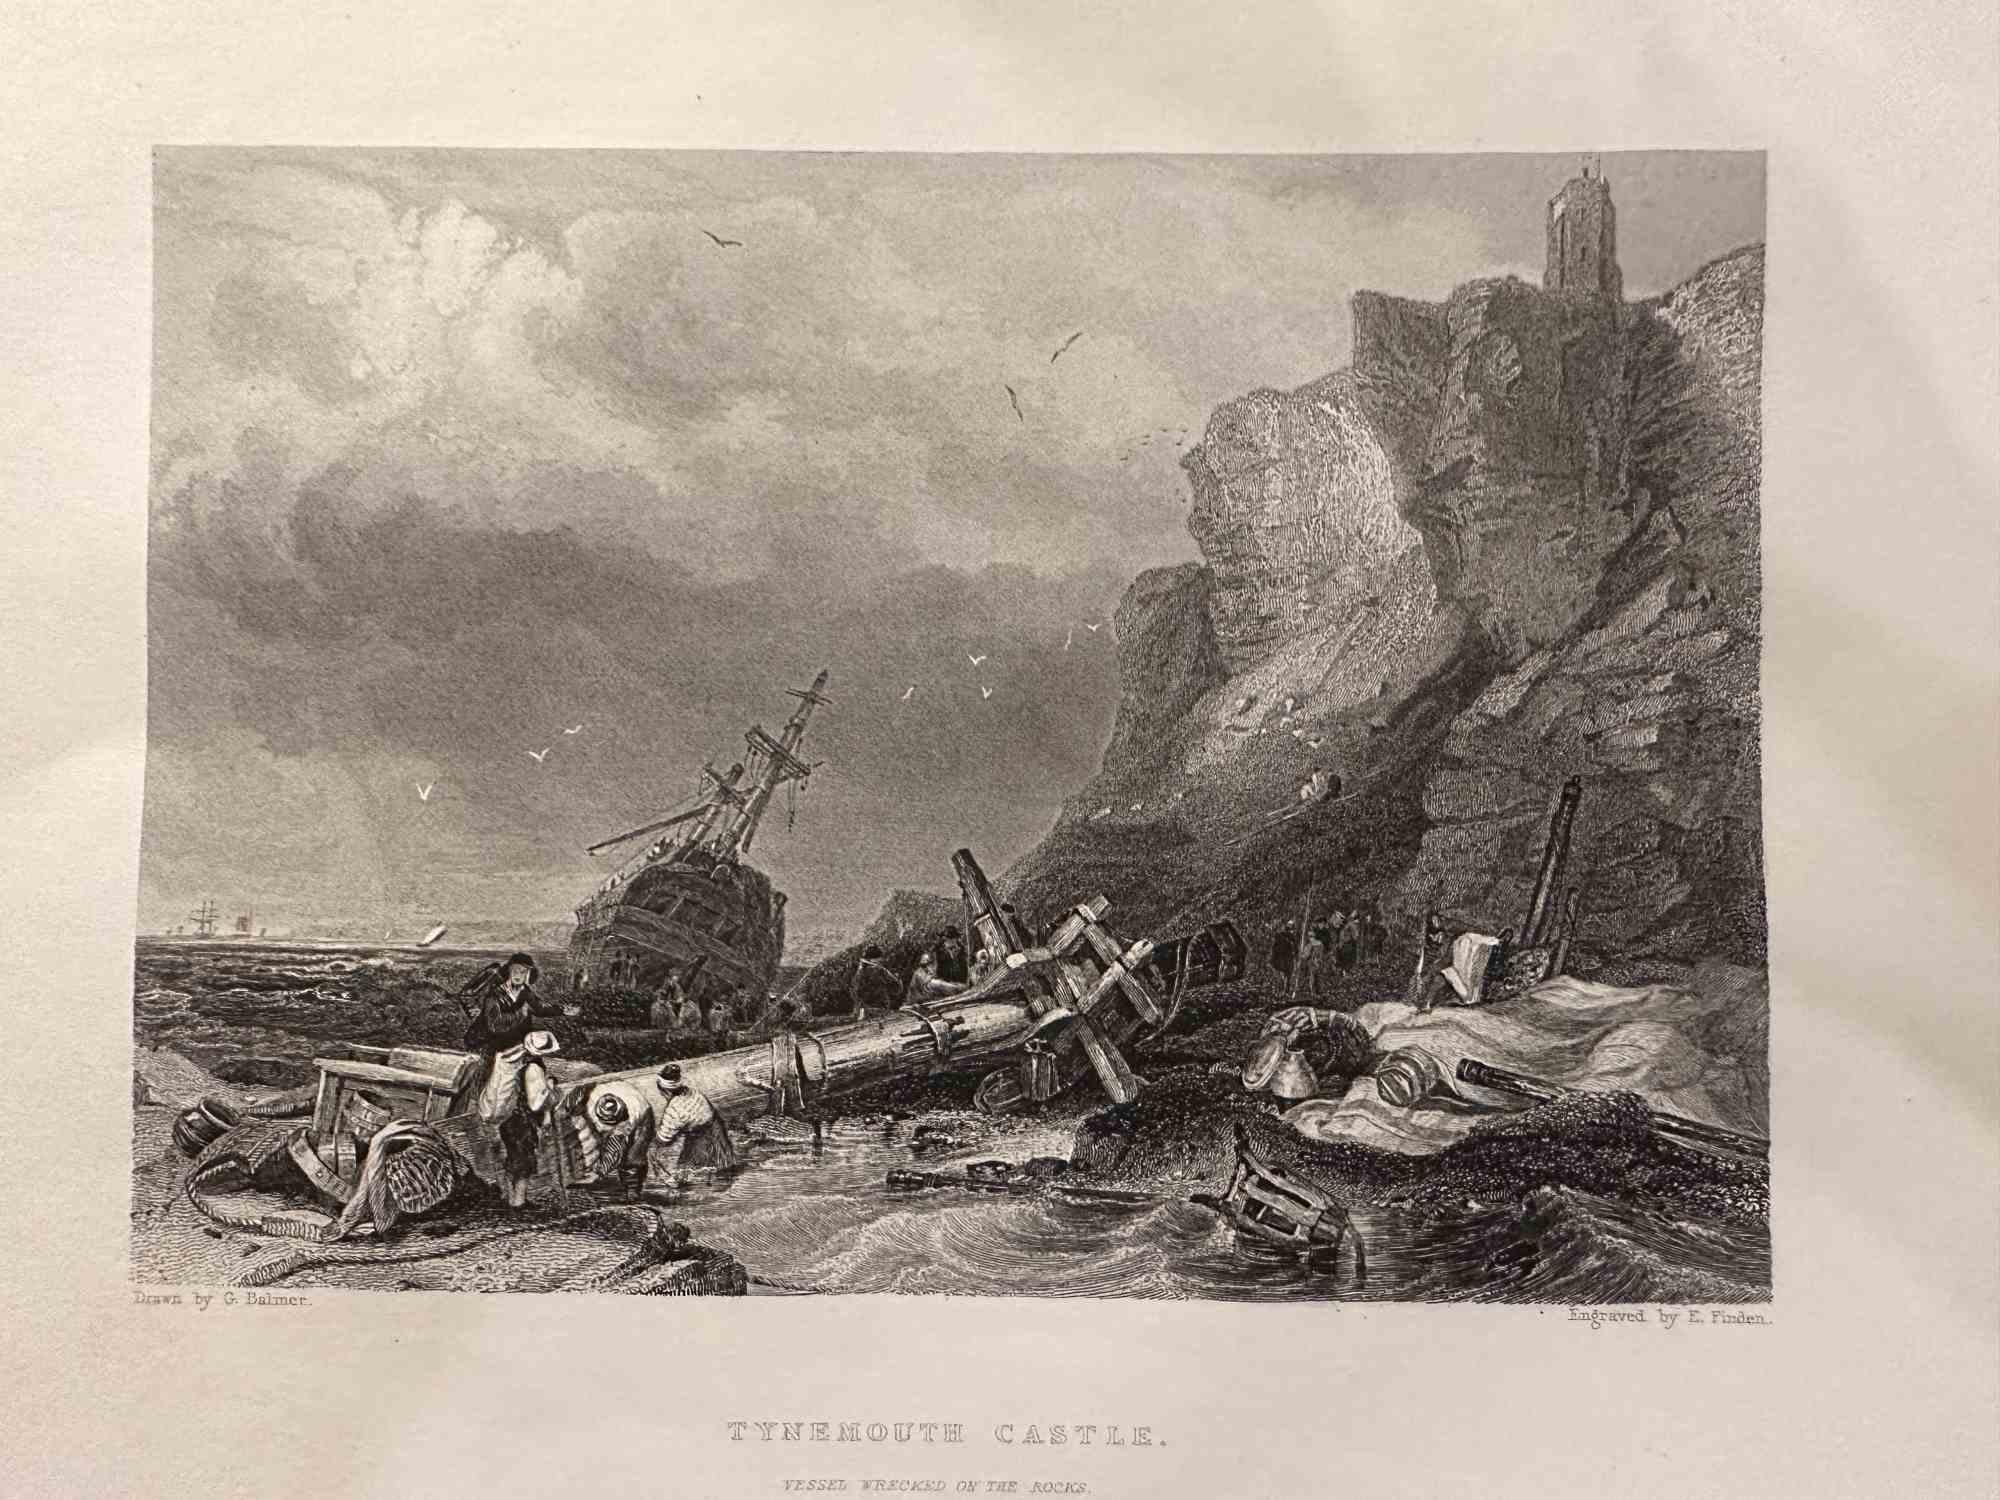 Tynemouth Castel - Etching by Edward Francis Finden - 1845